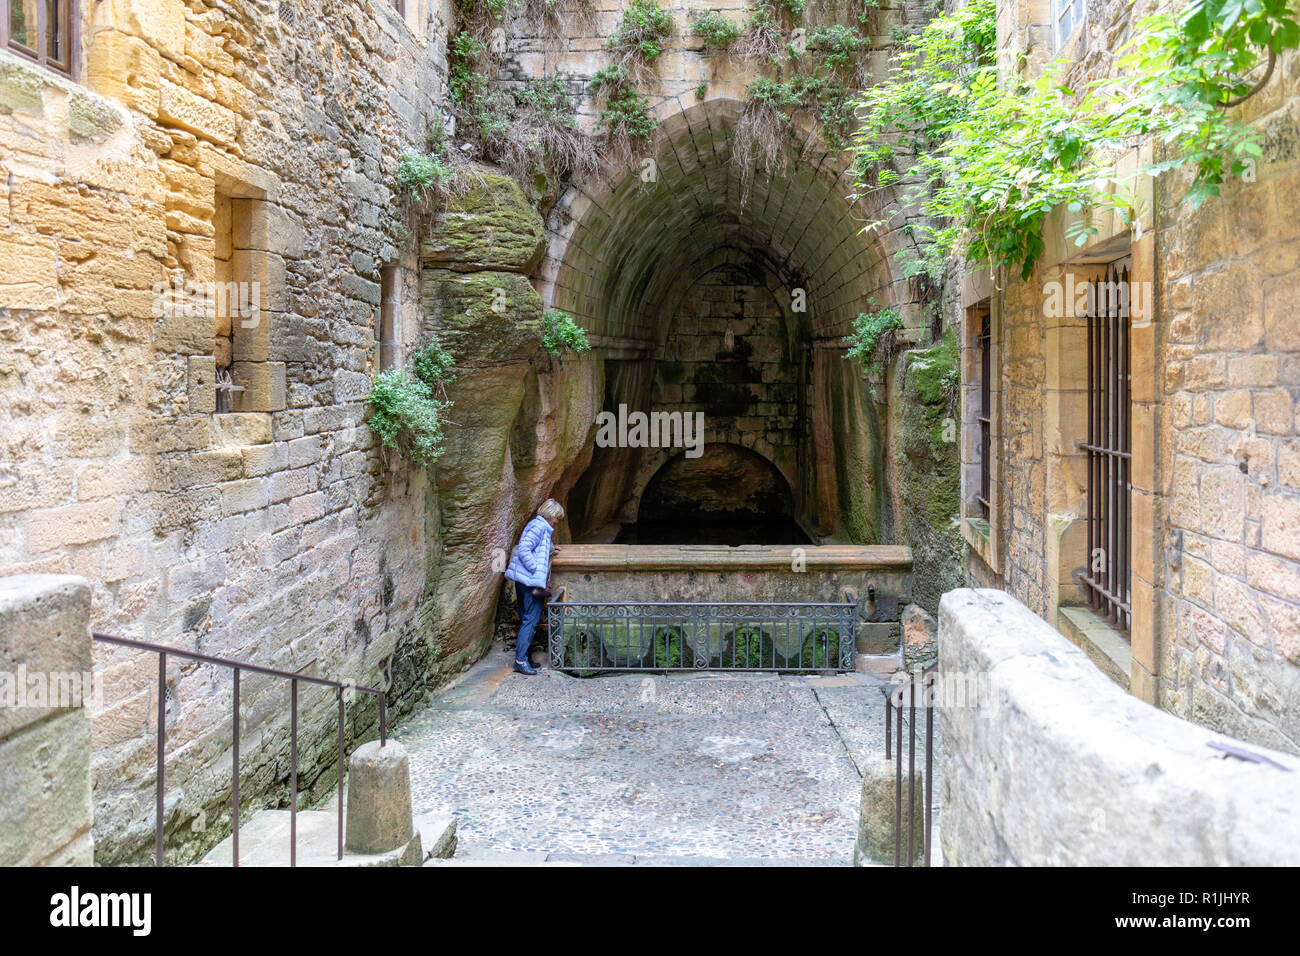 Ancient well at Sarlat-la-Caneda, Nouvelle- Aquitaine, France Stock Photo